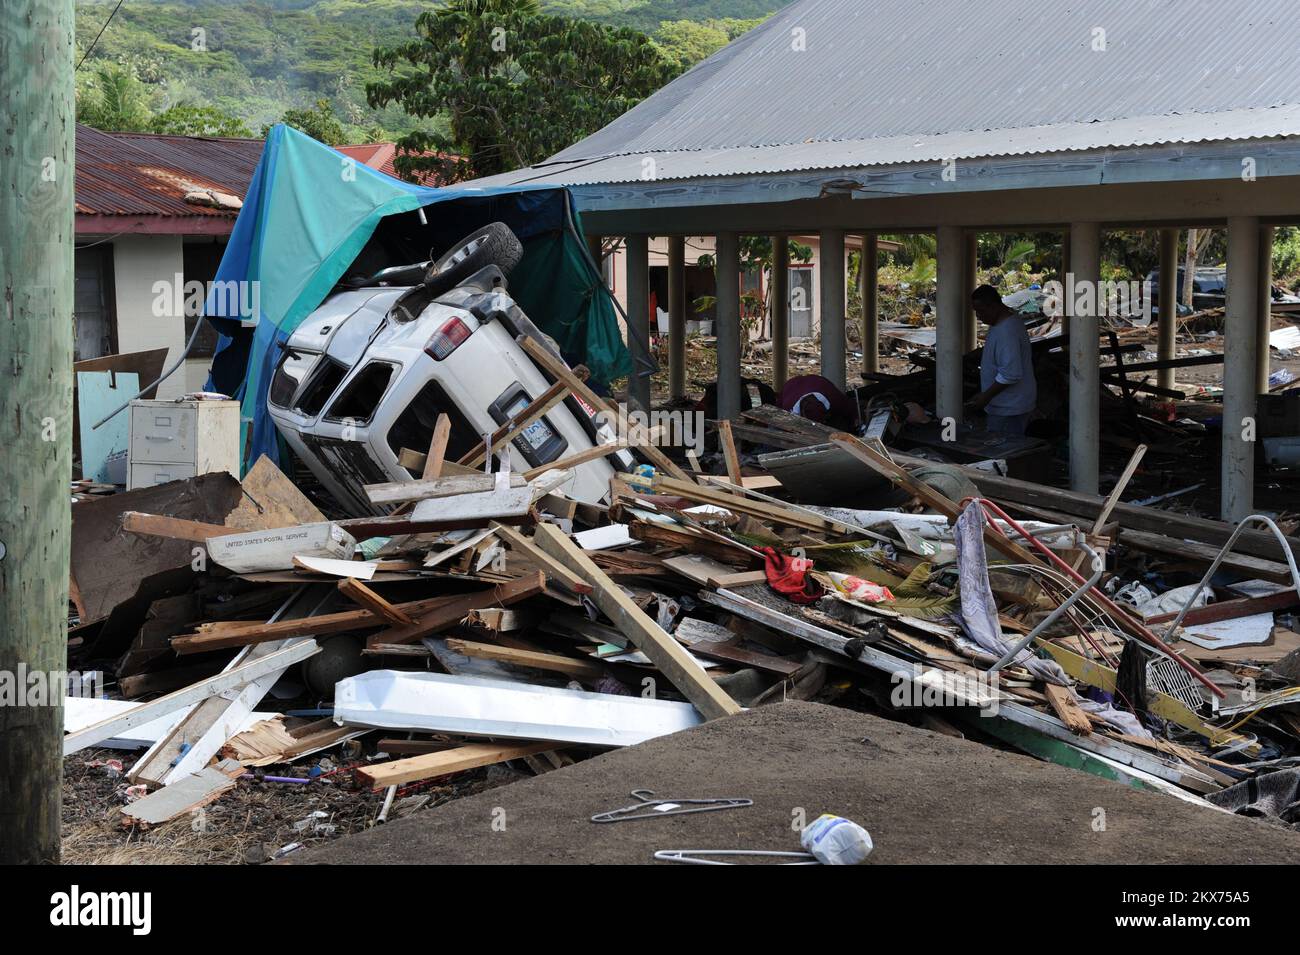 Earthquake   Tsunami - Leone, American Samoa, October 2, 2009   A car sits upside down among other debris that was caused by the recent earthquake and tsunami in American Samoa. The tsunami spread debris throughout the village of Leone. American Samoa Earthquake, Tsunami, and Flooding. Photographs Relating to Disasters and Emergency Management Programs, Activities, and Officials Stock Photo